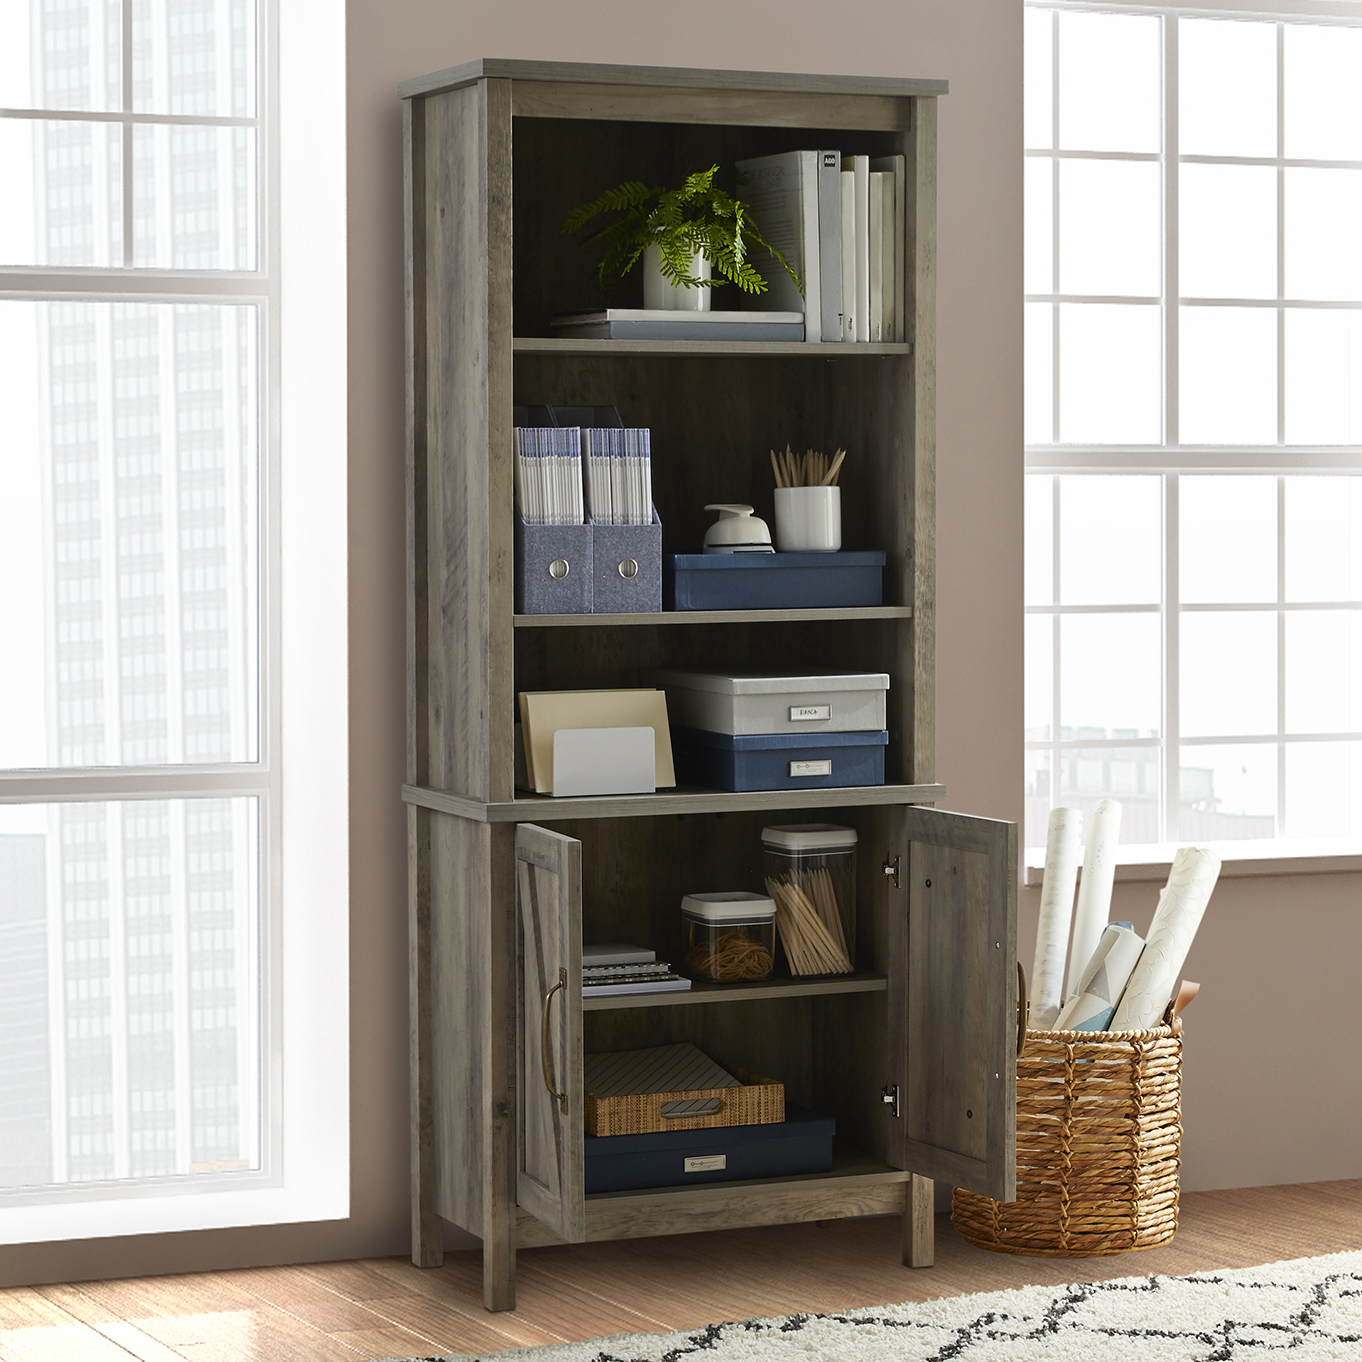 Better Homes & Gardens Modern Farmhouse 5 Shelf Library Bookcase with Doors, Rustic Gray Finish - image 4 of 16